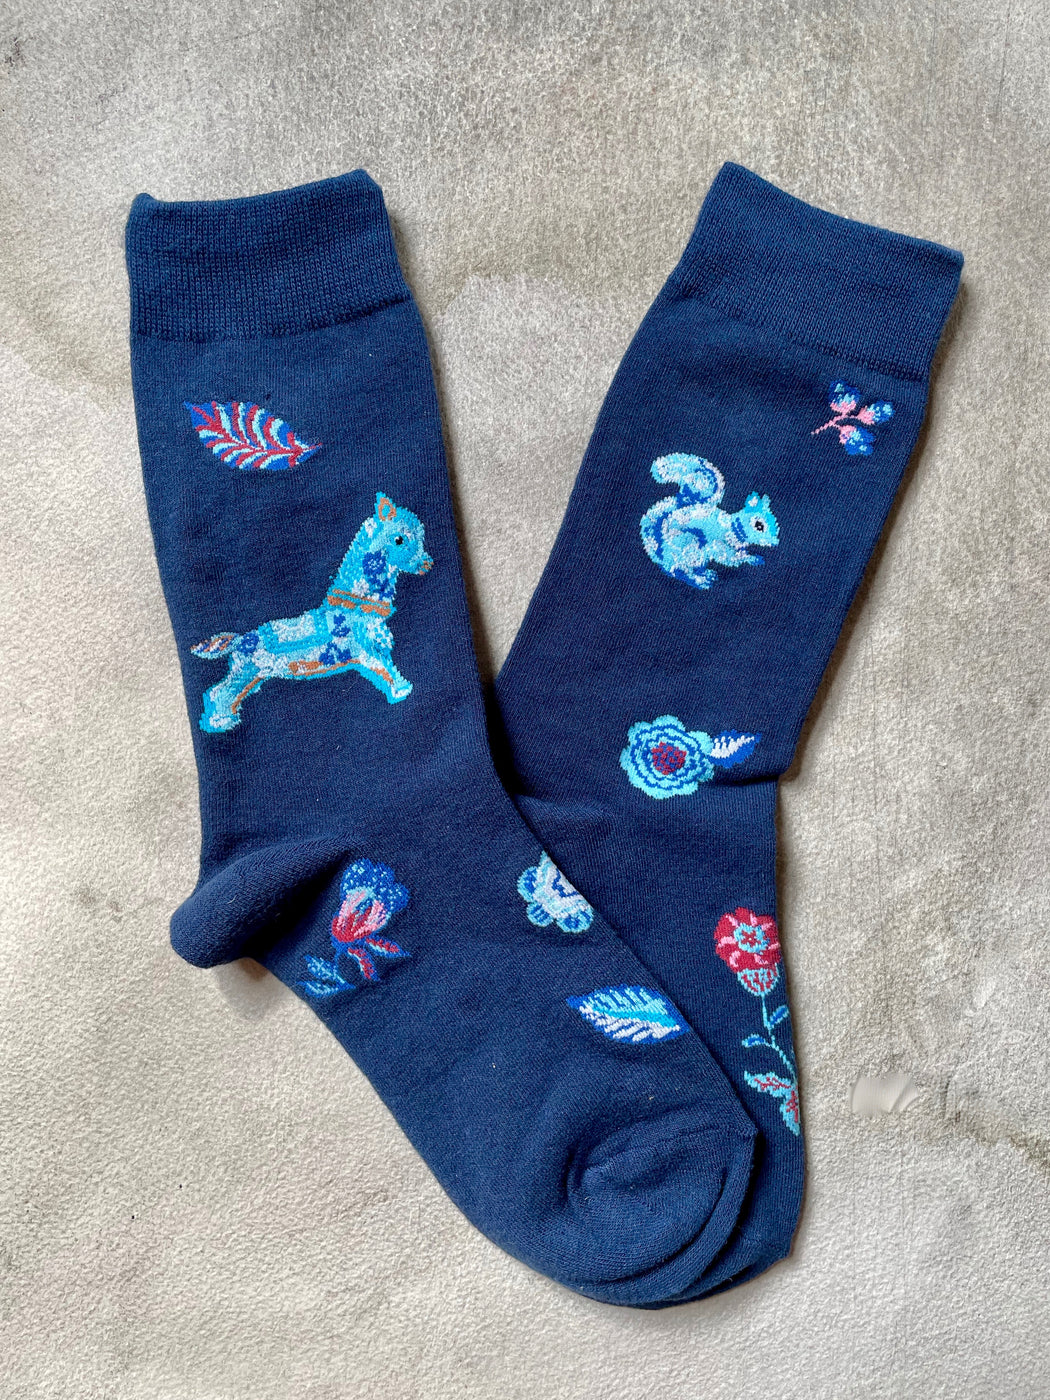 "The Blue Story" Socks by Nathalie Lete